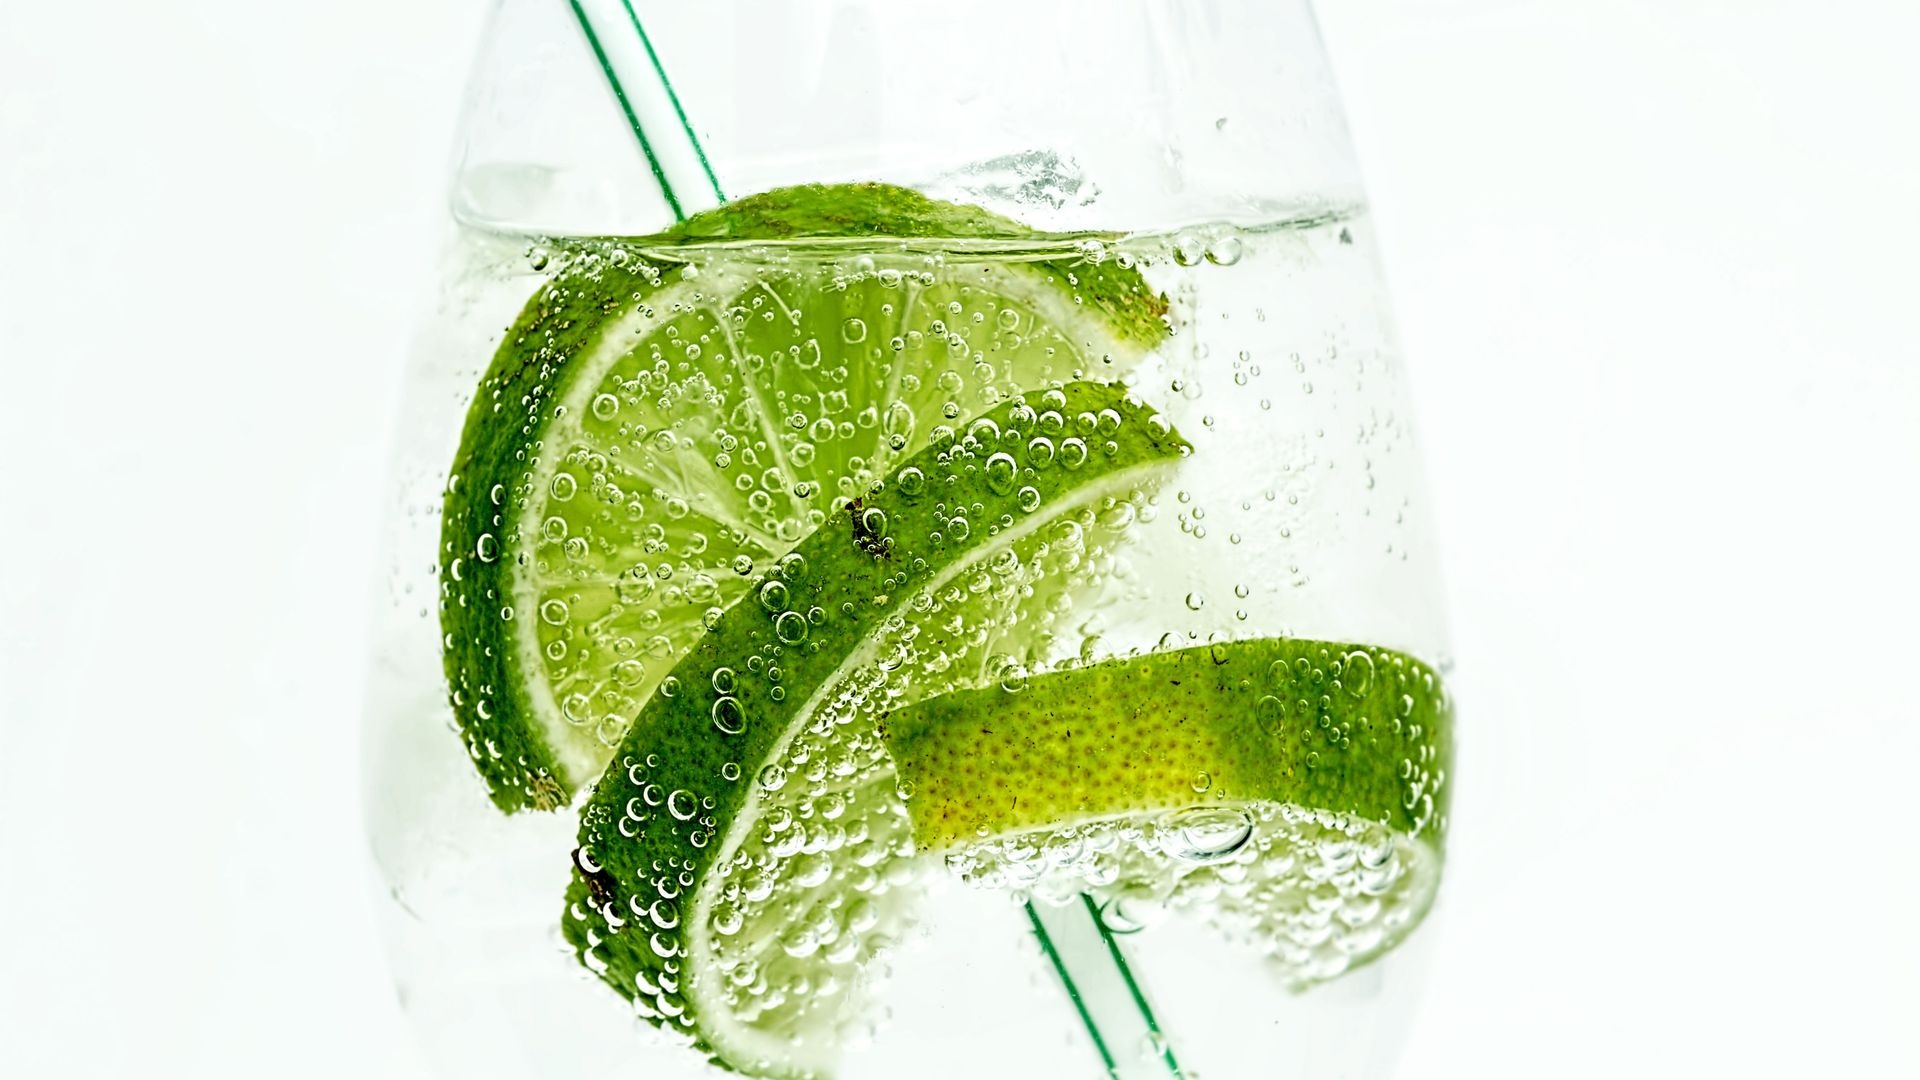 Soda with lime, Clear glass, Refreshing drink, Mewallpaper image, 1920x1080 Full HD Desktop